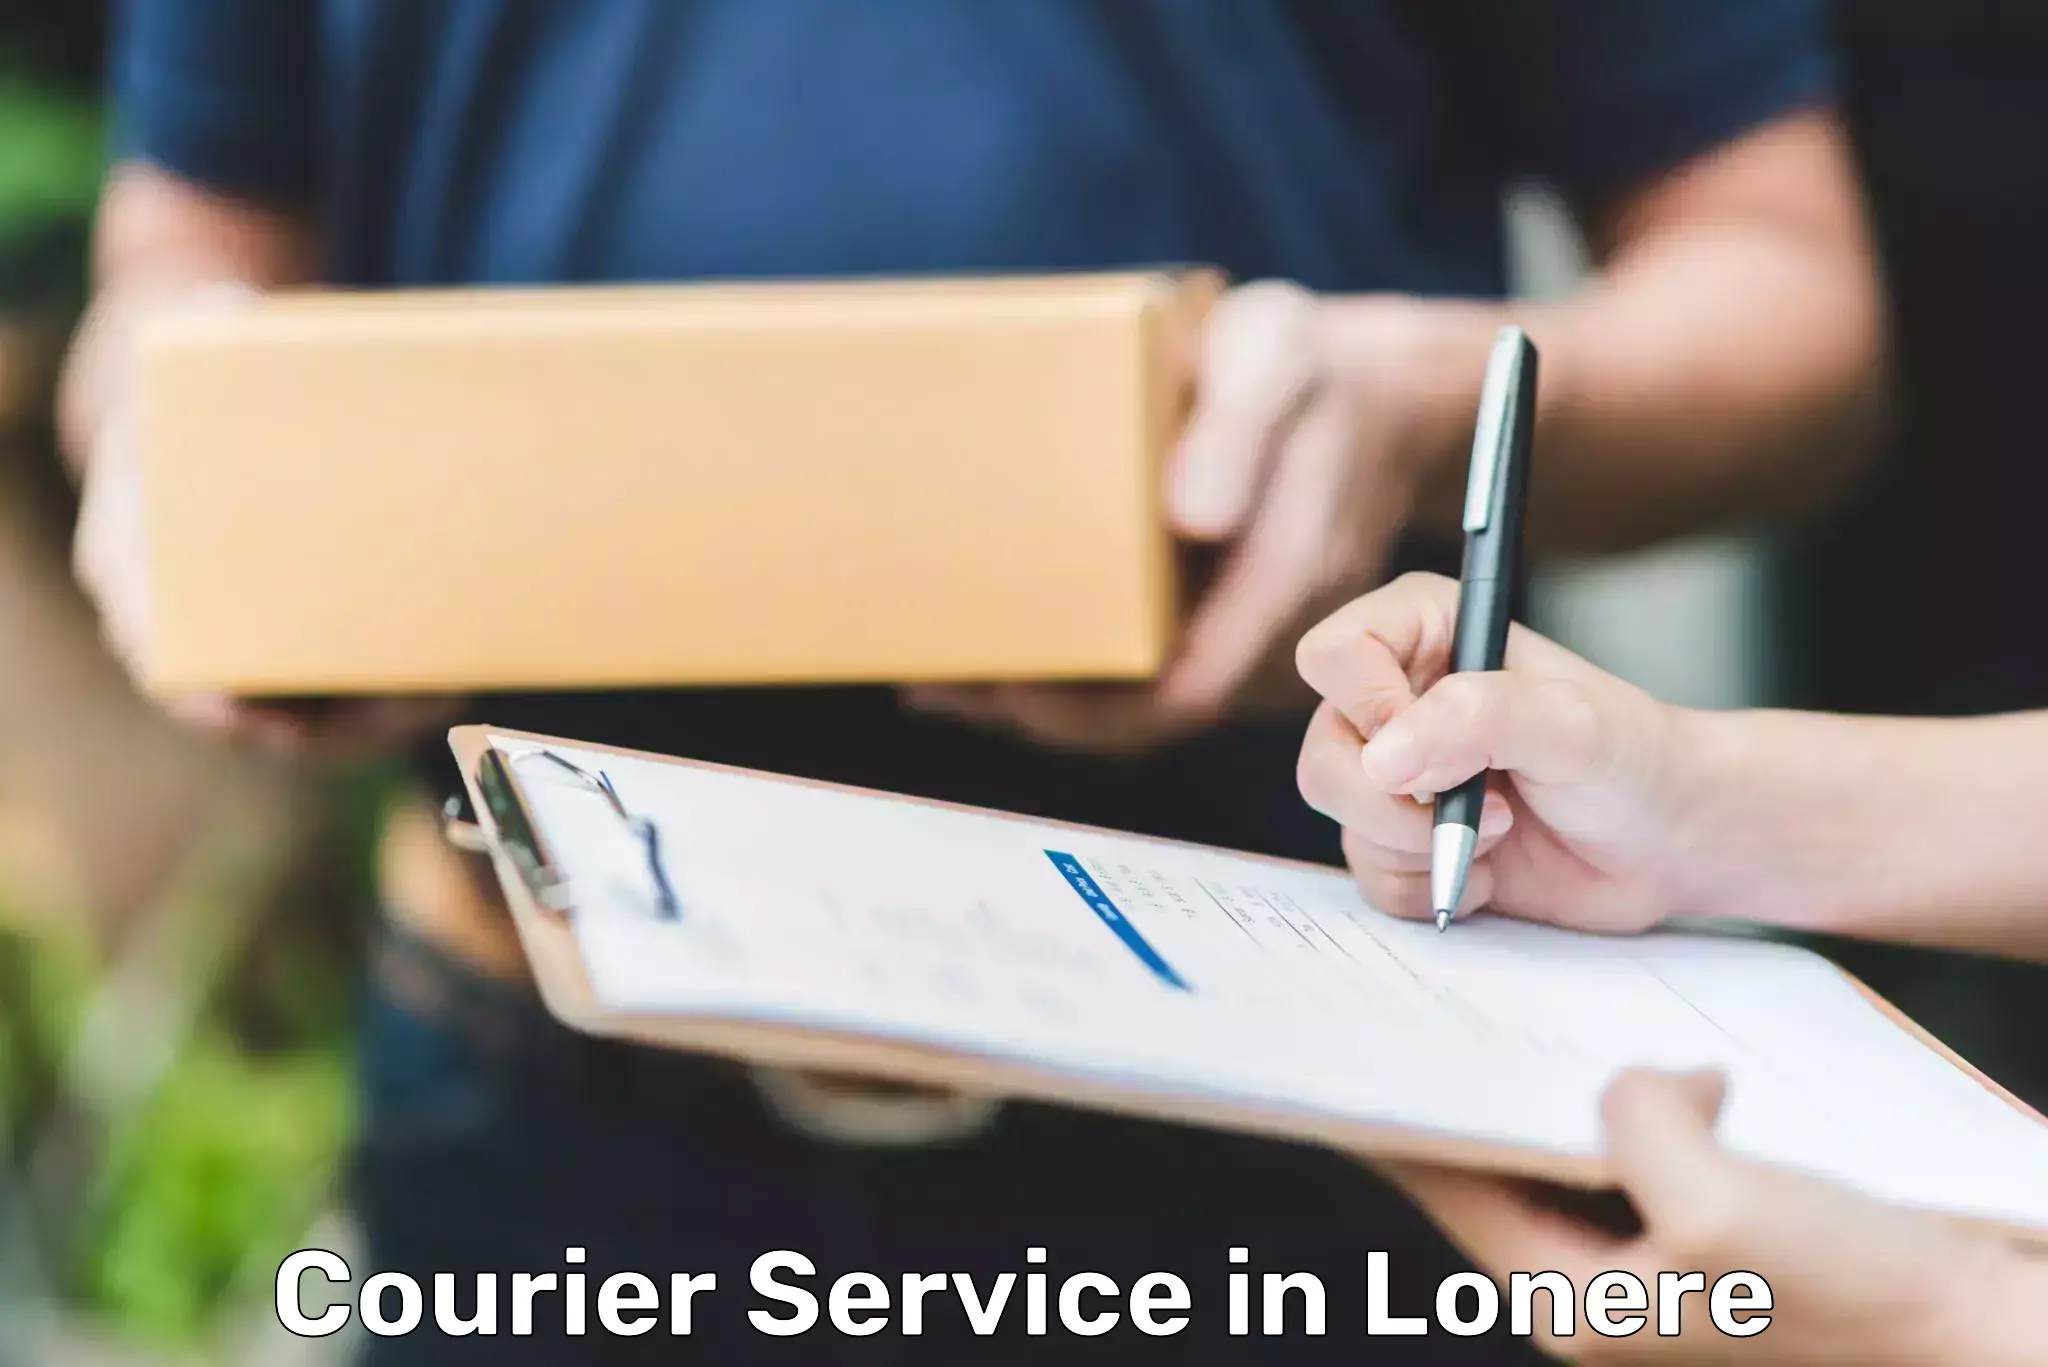 Courier service innovation in Lonere